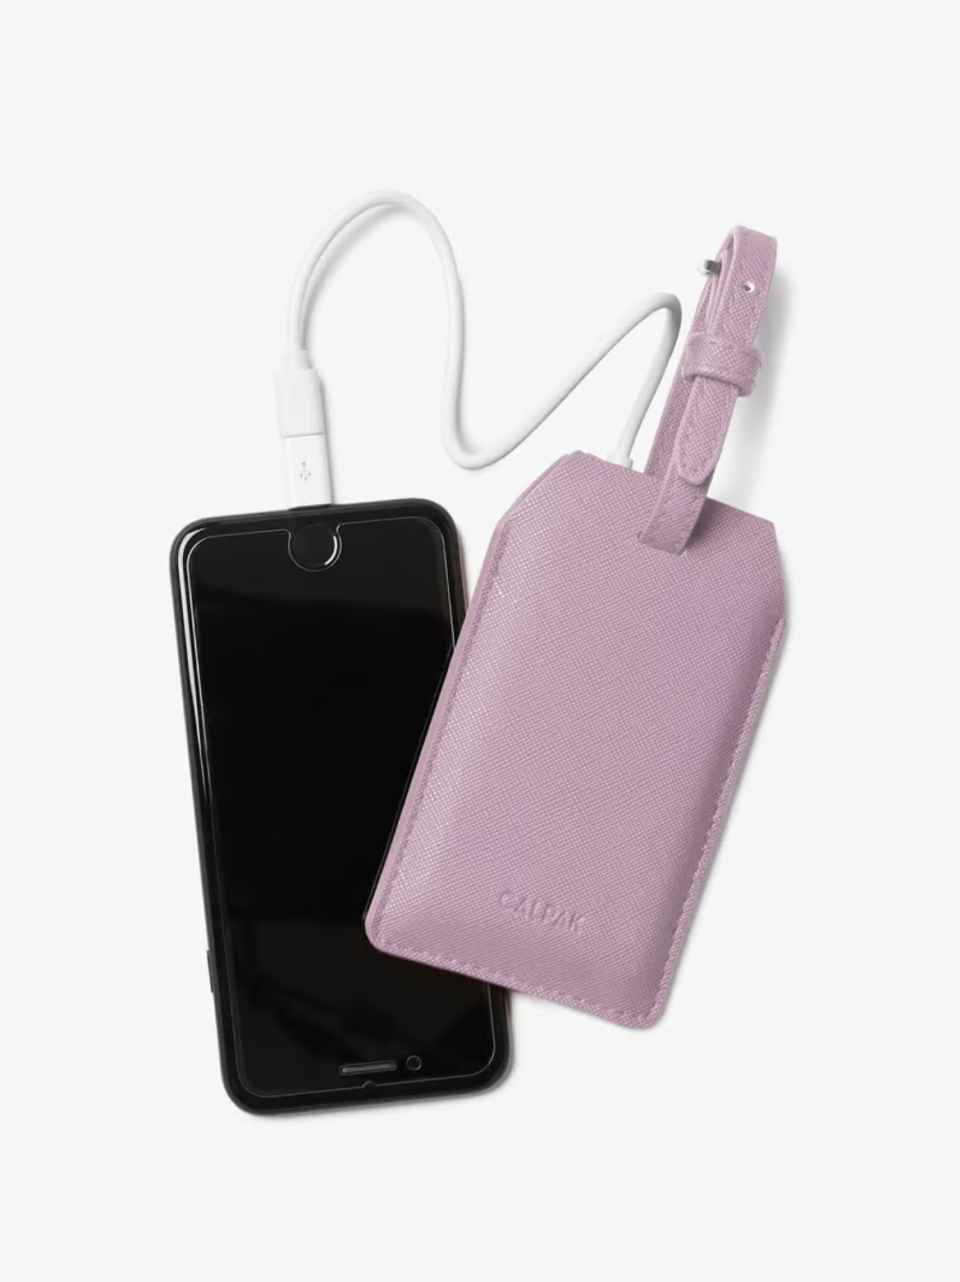 lavender portable charger luggage tag plugged into phone